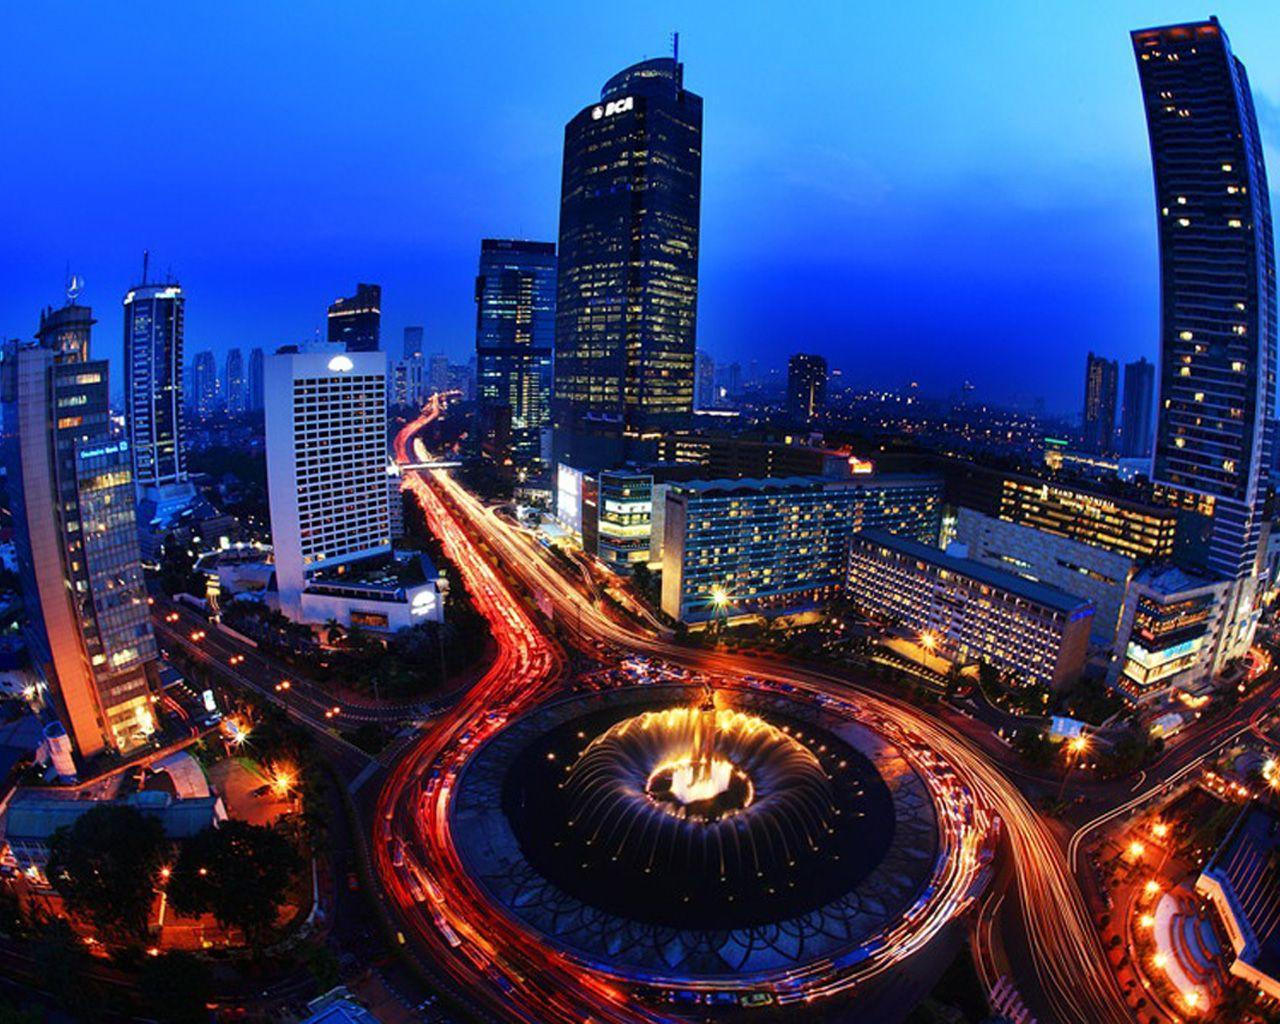 QSW Jakarta Wallpapers in Best Resolutions, High Definition